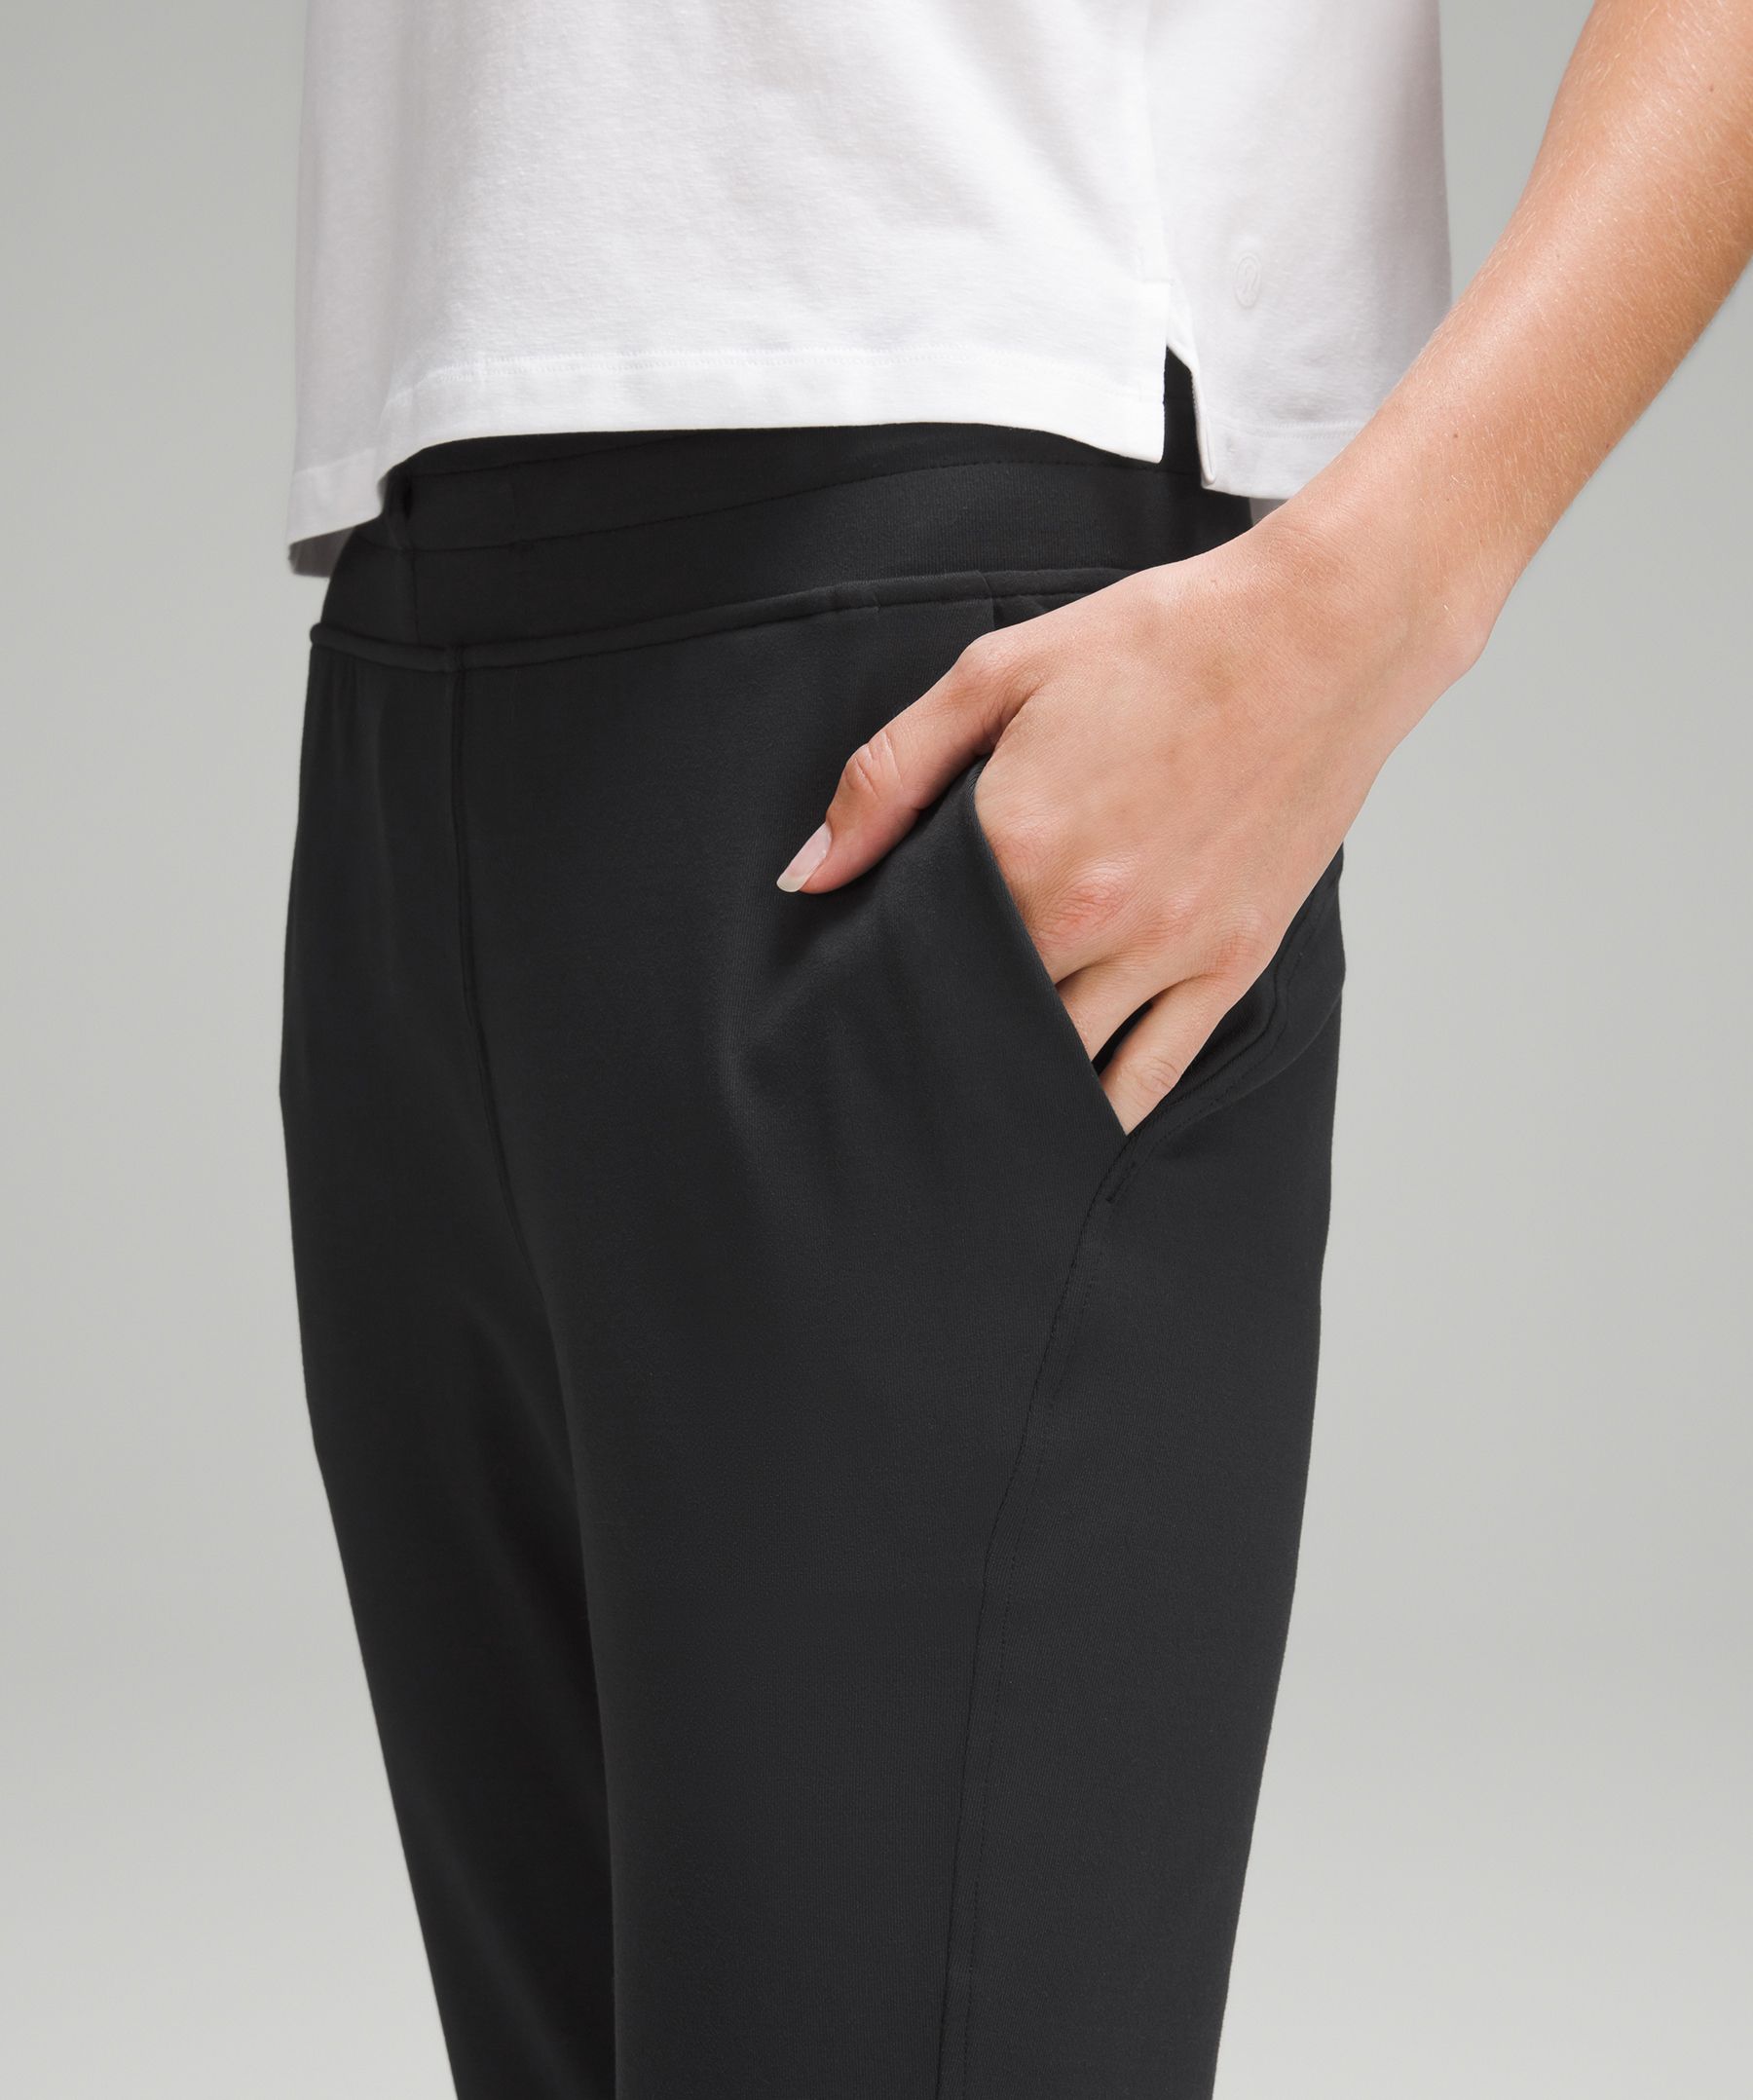 Lululemon Ready To Rulu jogger Tan Size 4 - $67 (36% Off Retail) - From  Lauren